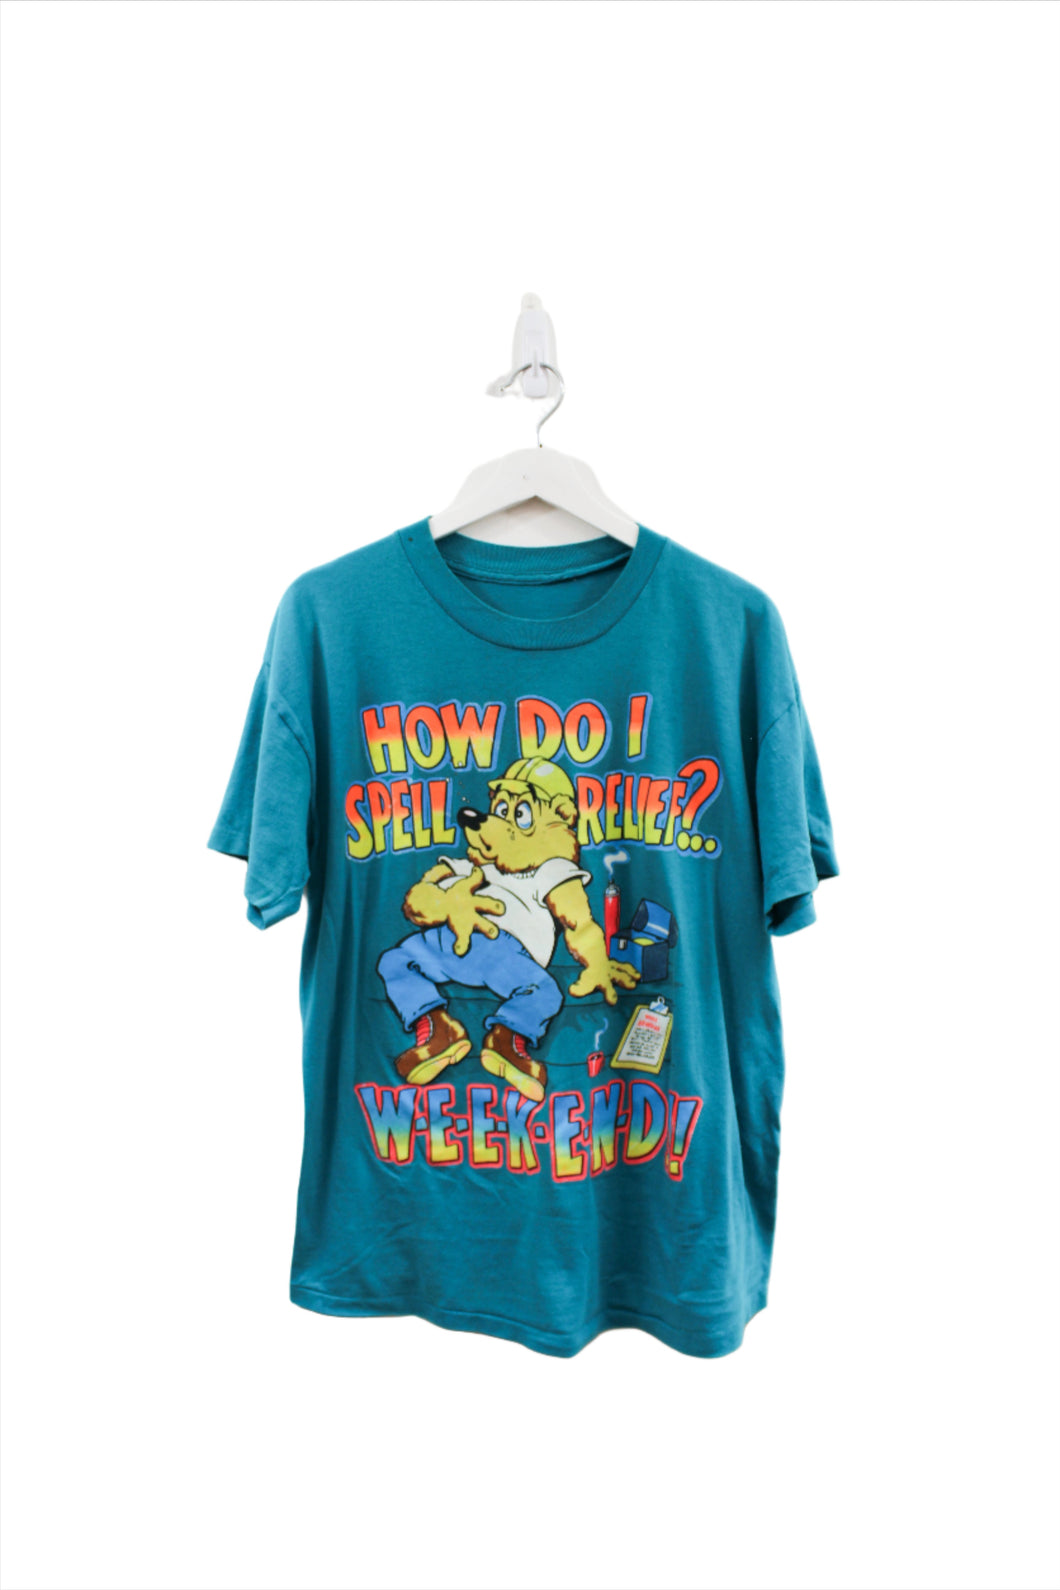 Z - Vintage Single Stitch How Do I Spell Relief? Weekend! Graphic Tee